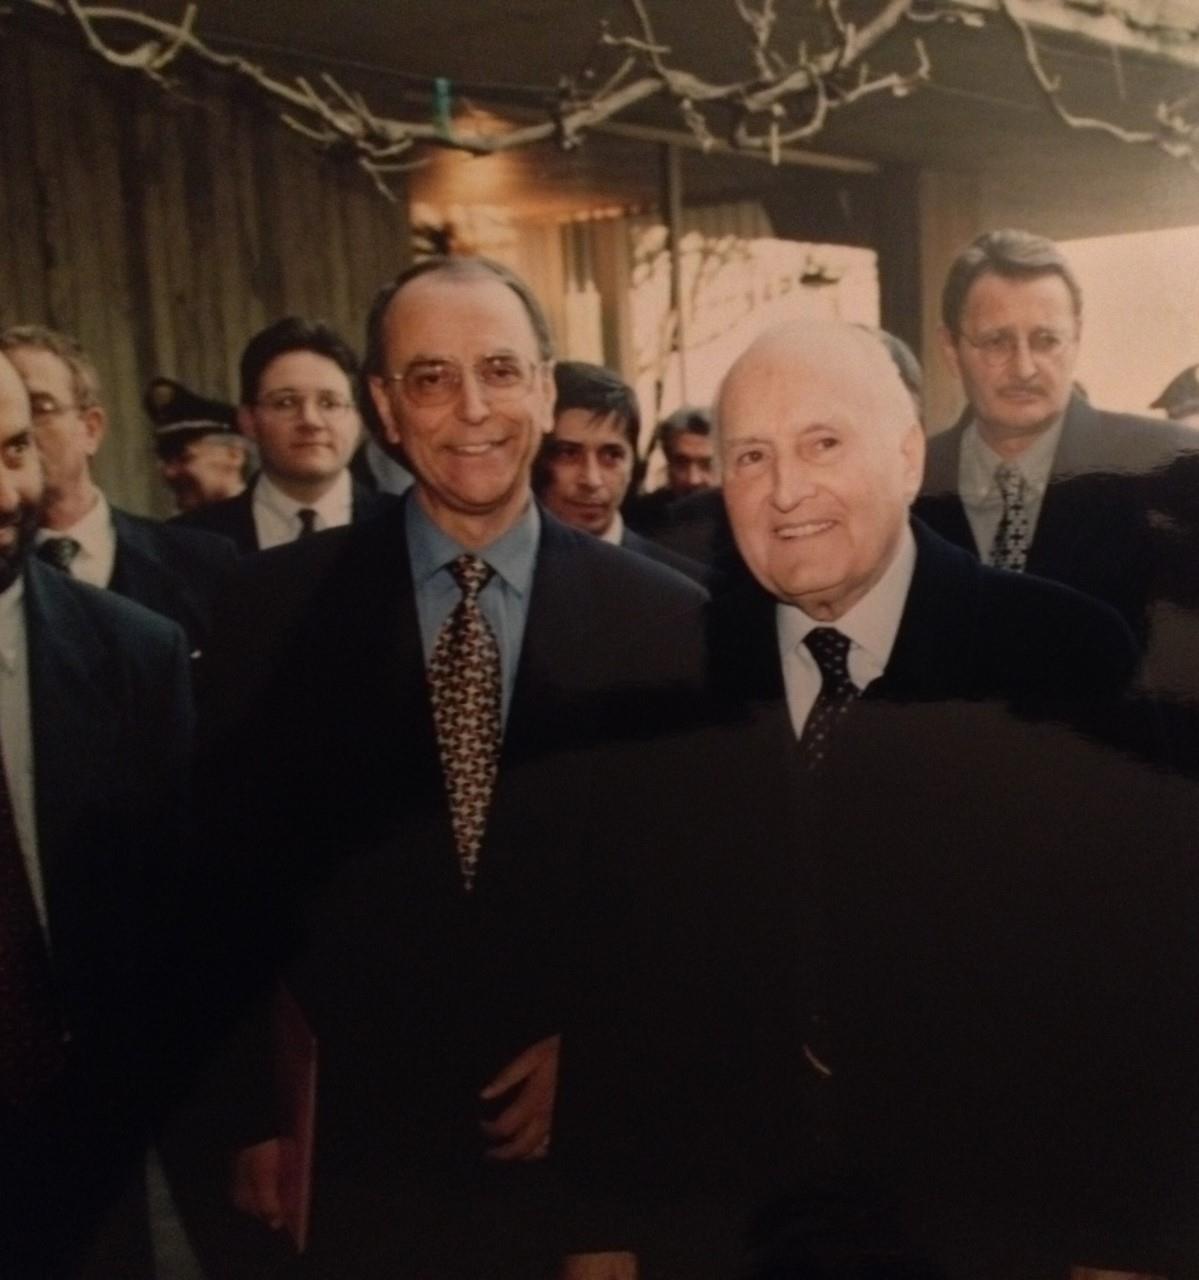 Italian President Oscar Luigi Scalfaro, right, and Vincenzo Mazza attending the opening of an Adventist retirement home in Forle, Italy, in 1998.